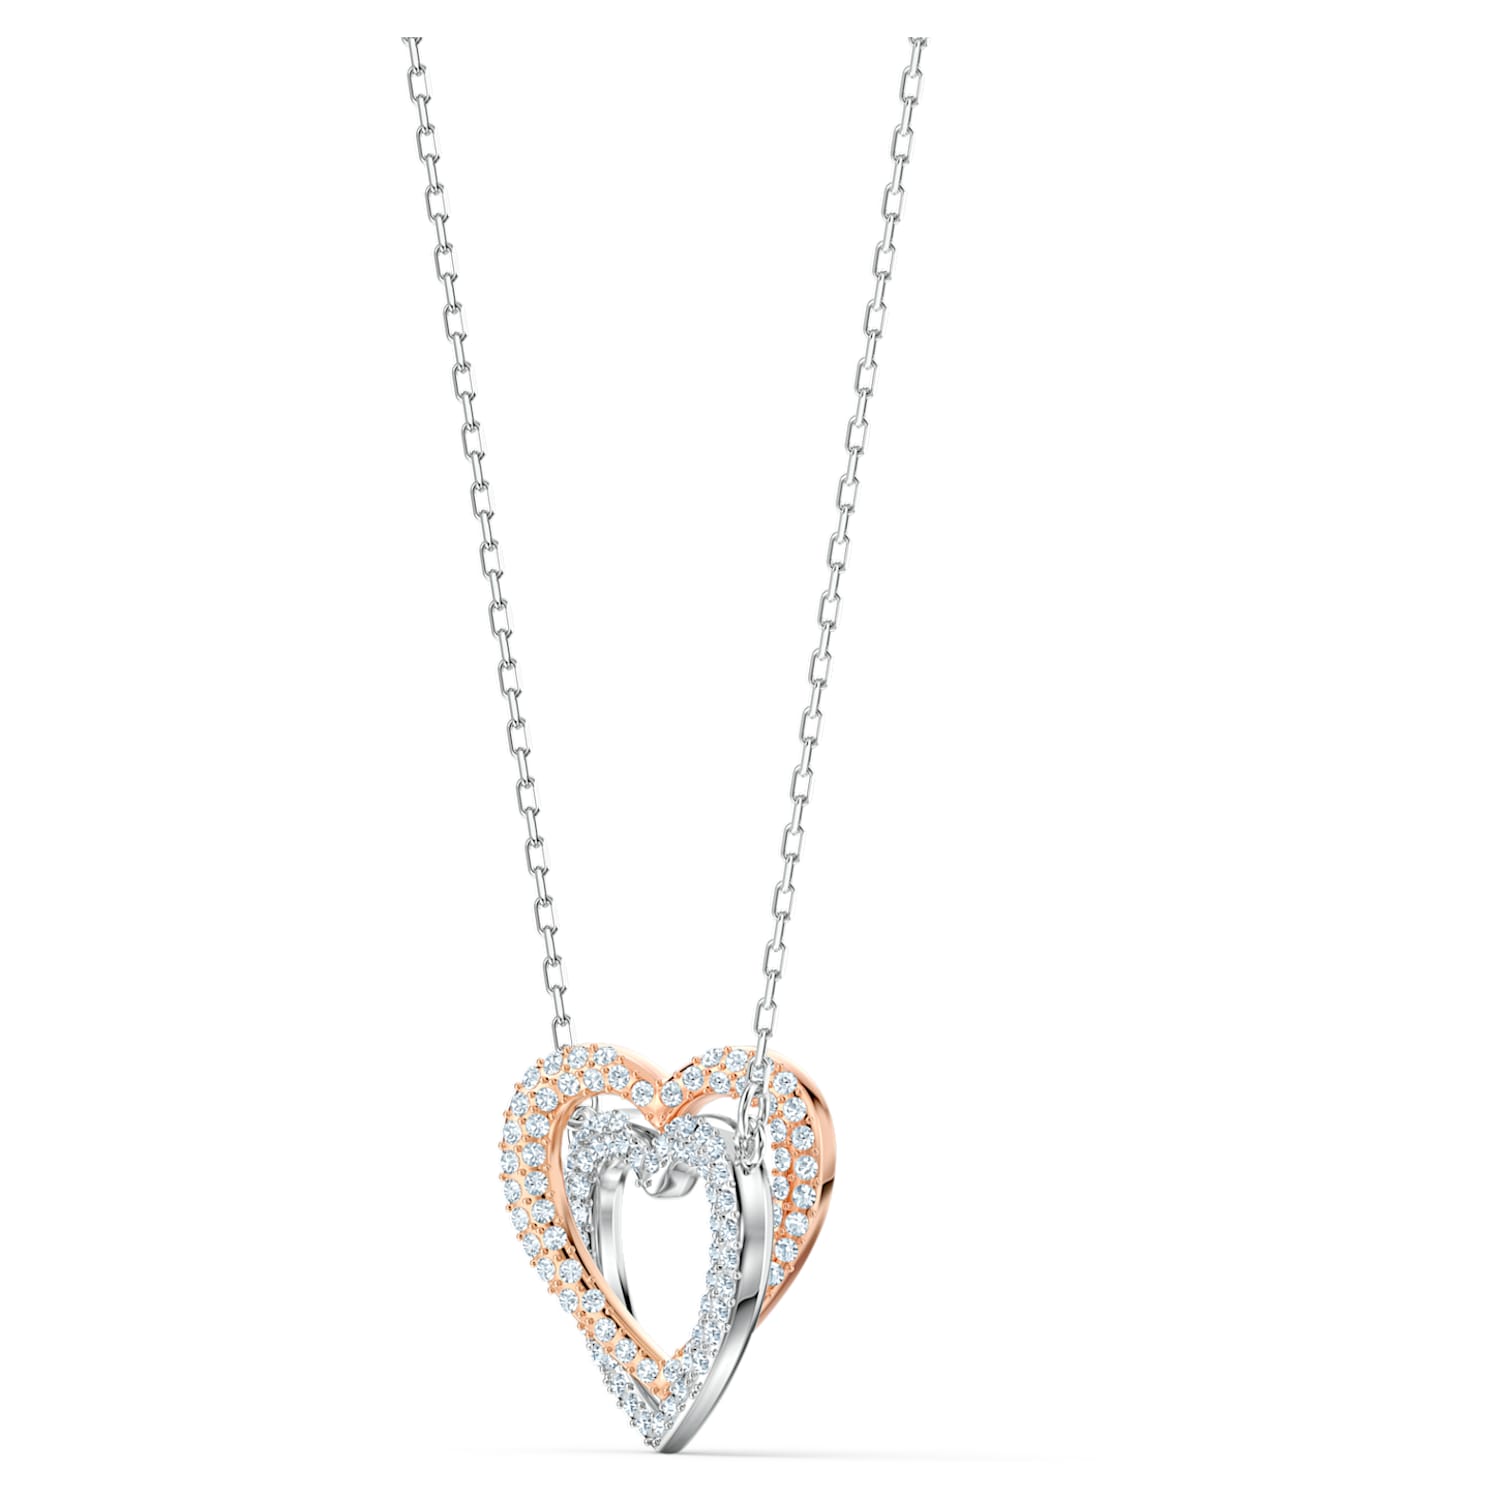 Entwined Hearts Necklace Sterling Silver – Lucy Ashton Jewellery US